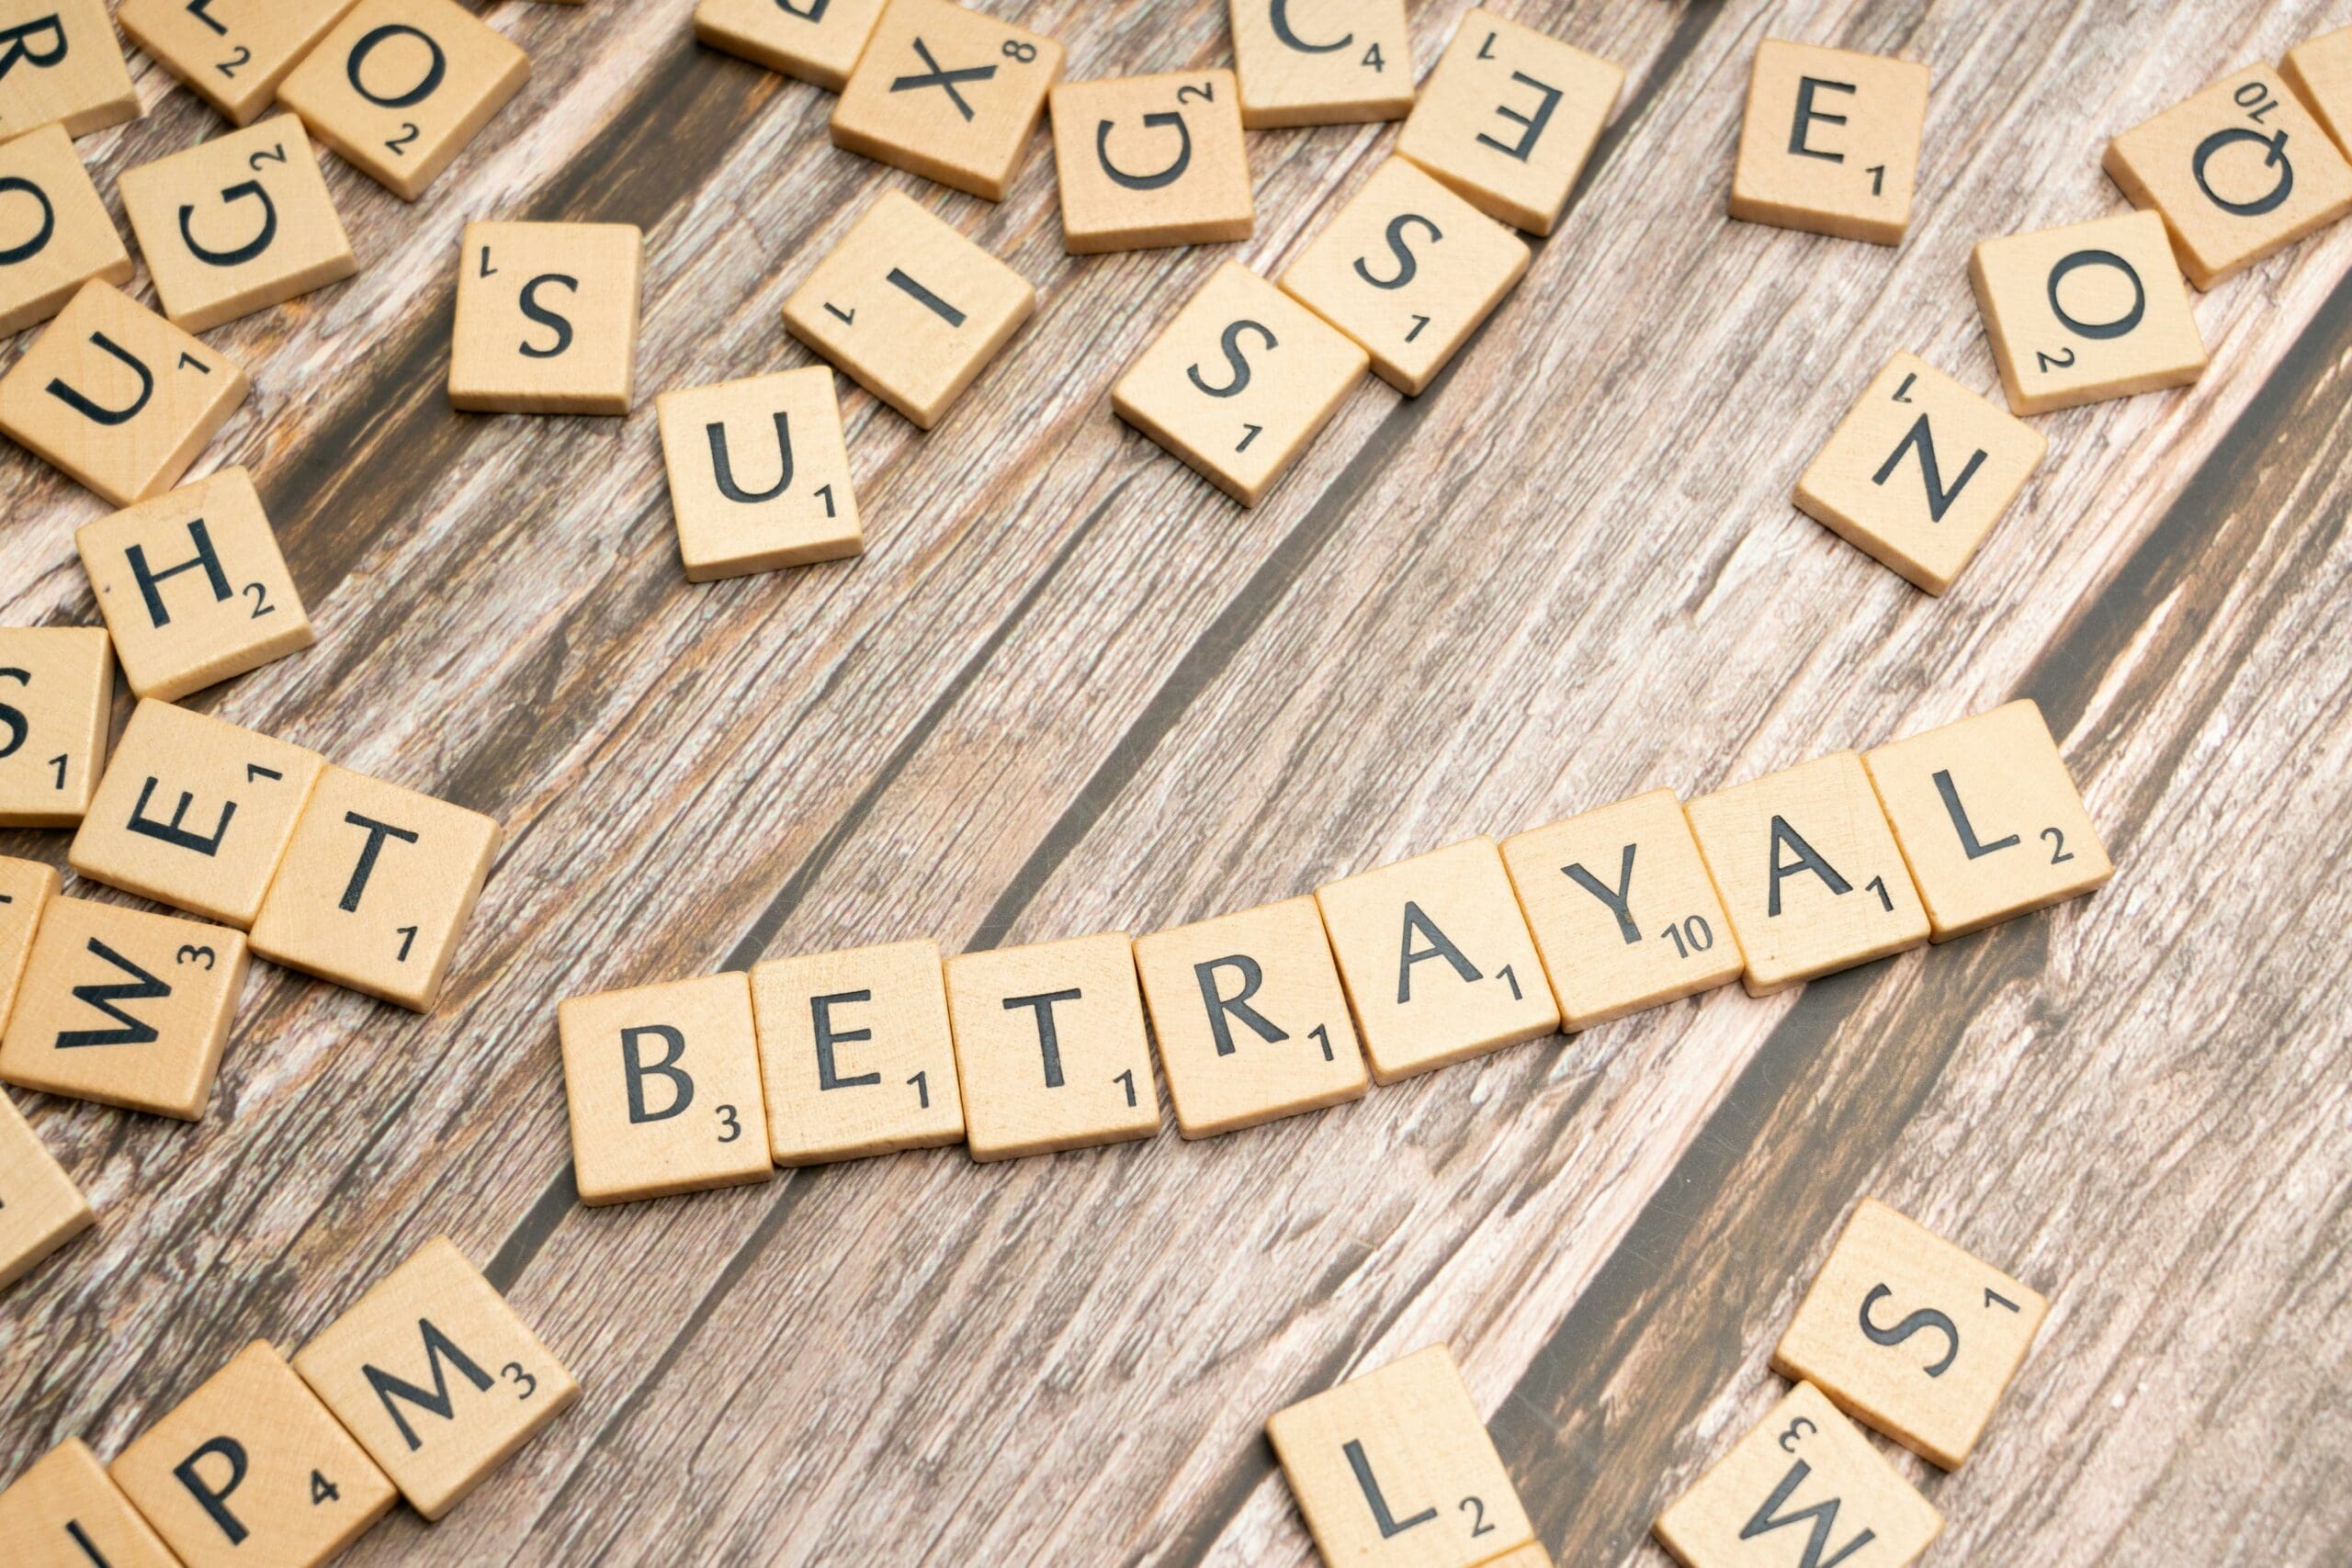 Scrabble tiles spelling out 'BETRAYAL' on a wooden background, symbolising the breach of trust in infidelity and divorce.